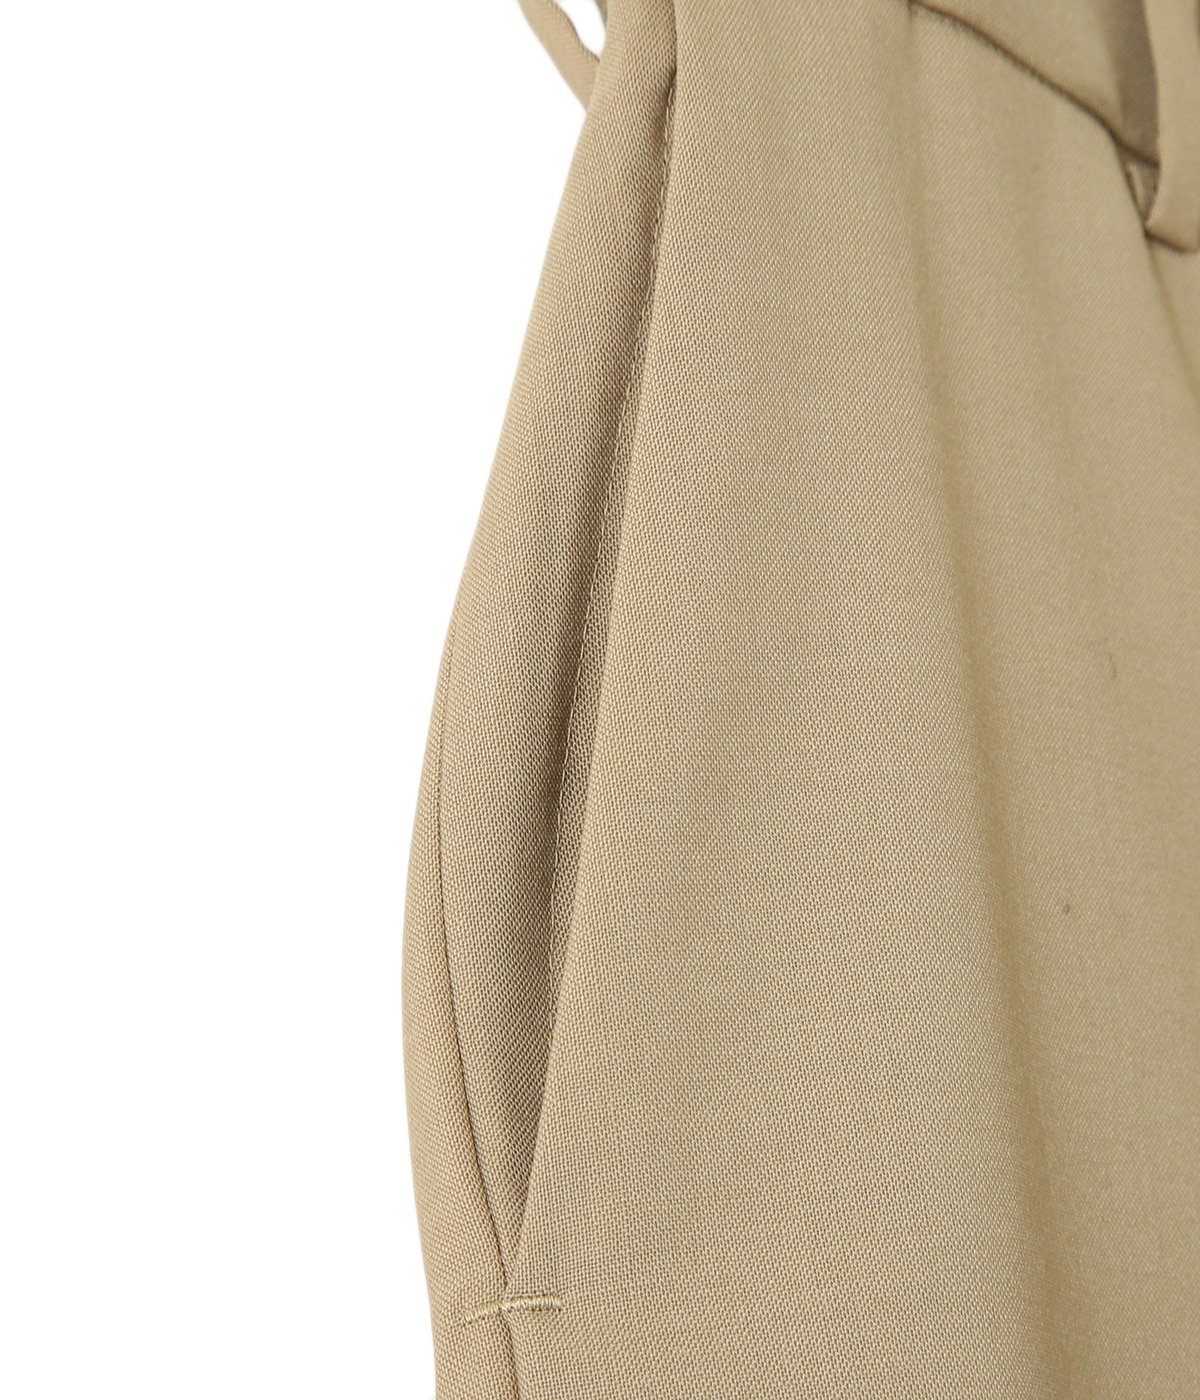 FLAT-FRONT TROUSERS - ORGANIC WOOL TROPICAL -